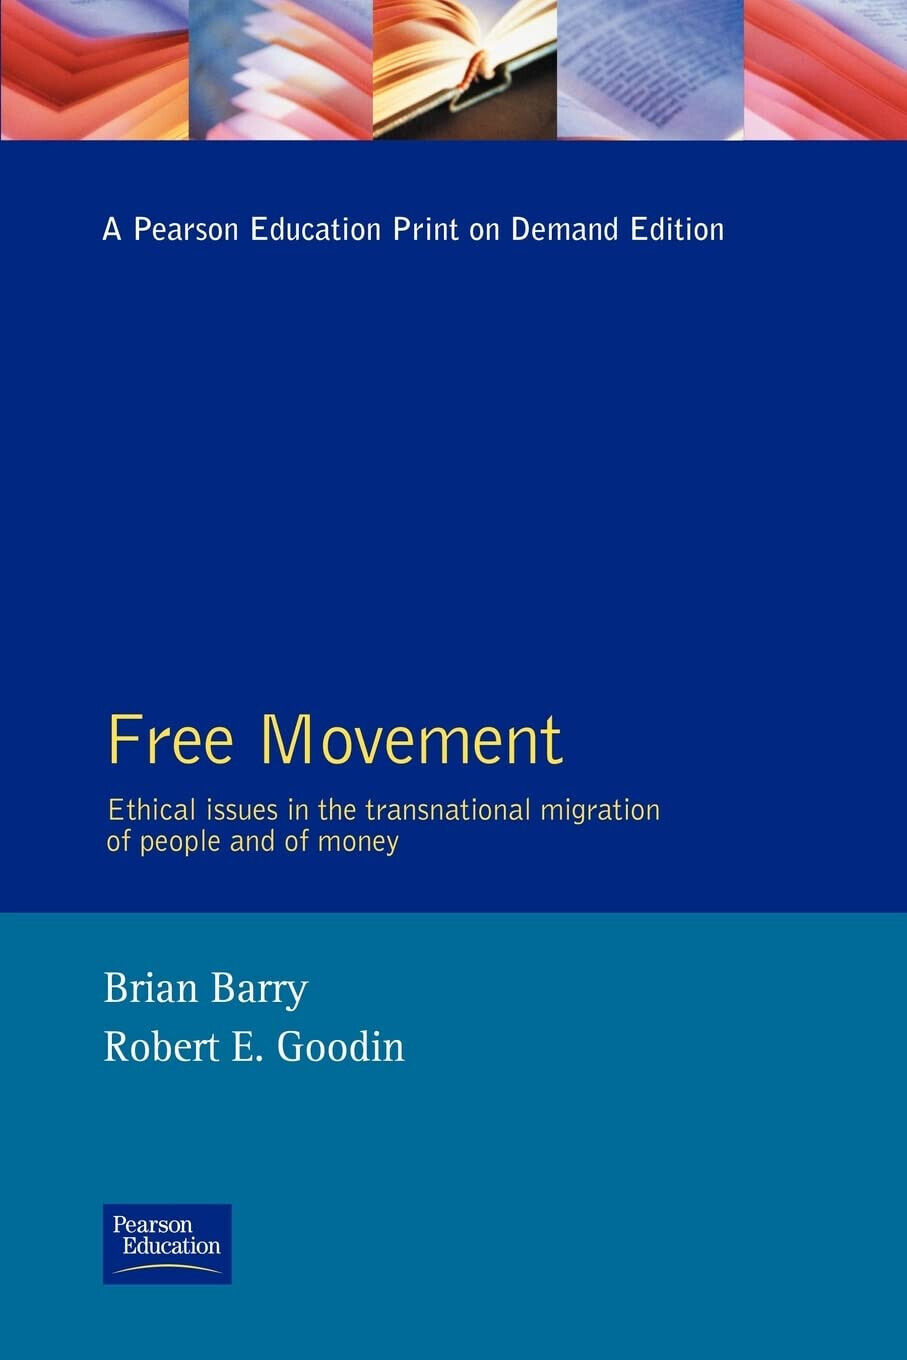 Free Movement - Maron Ed Barry - ROUTLEDGE, 1992